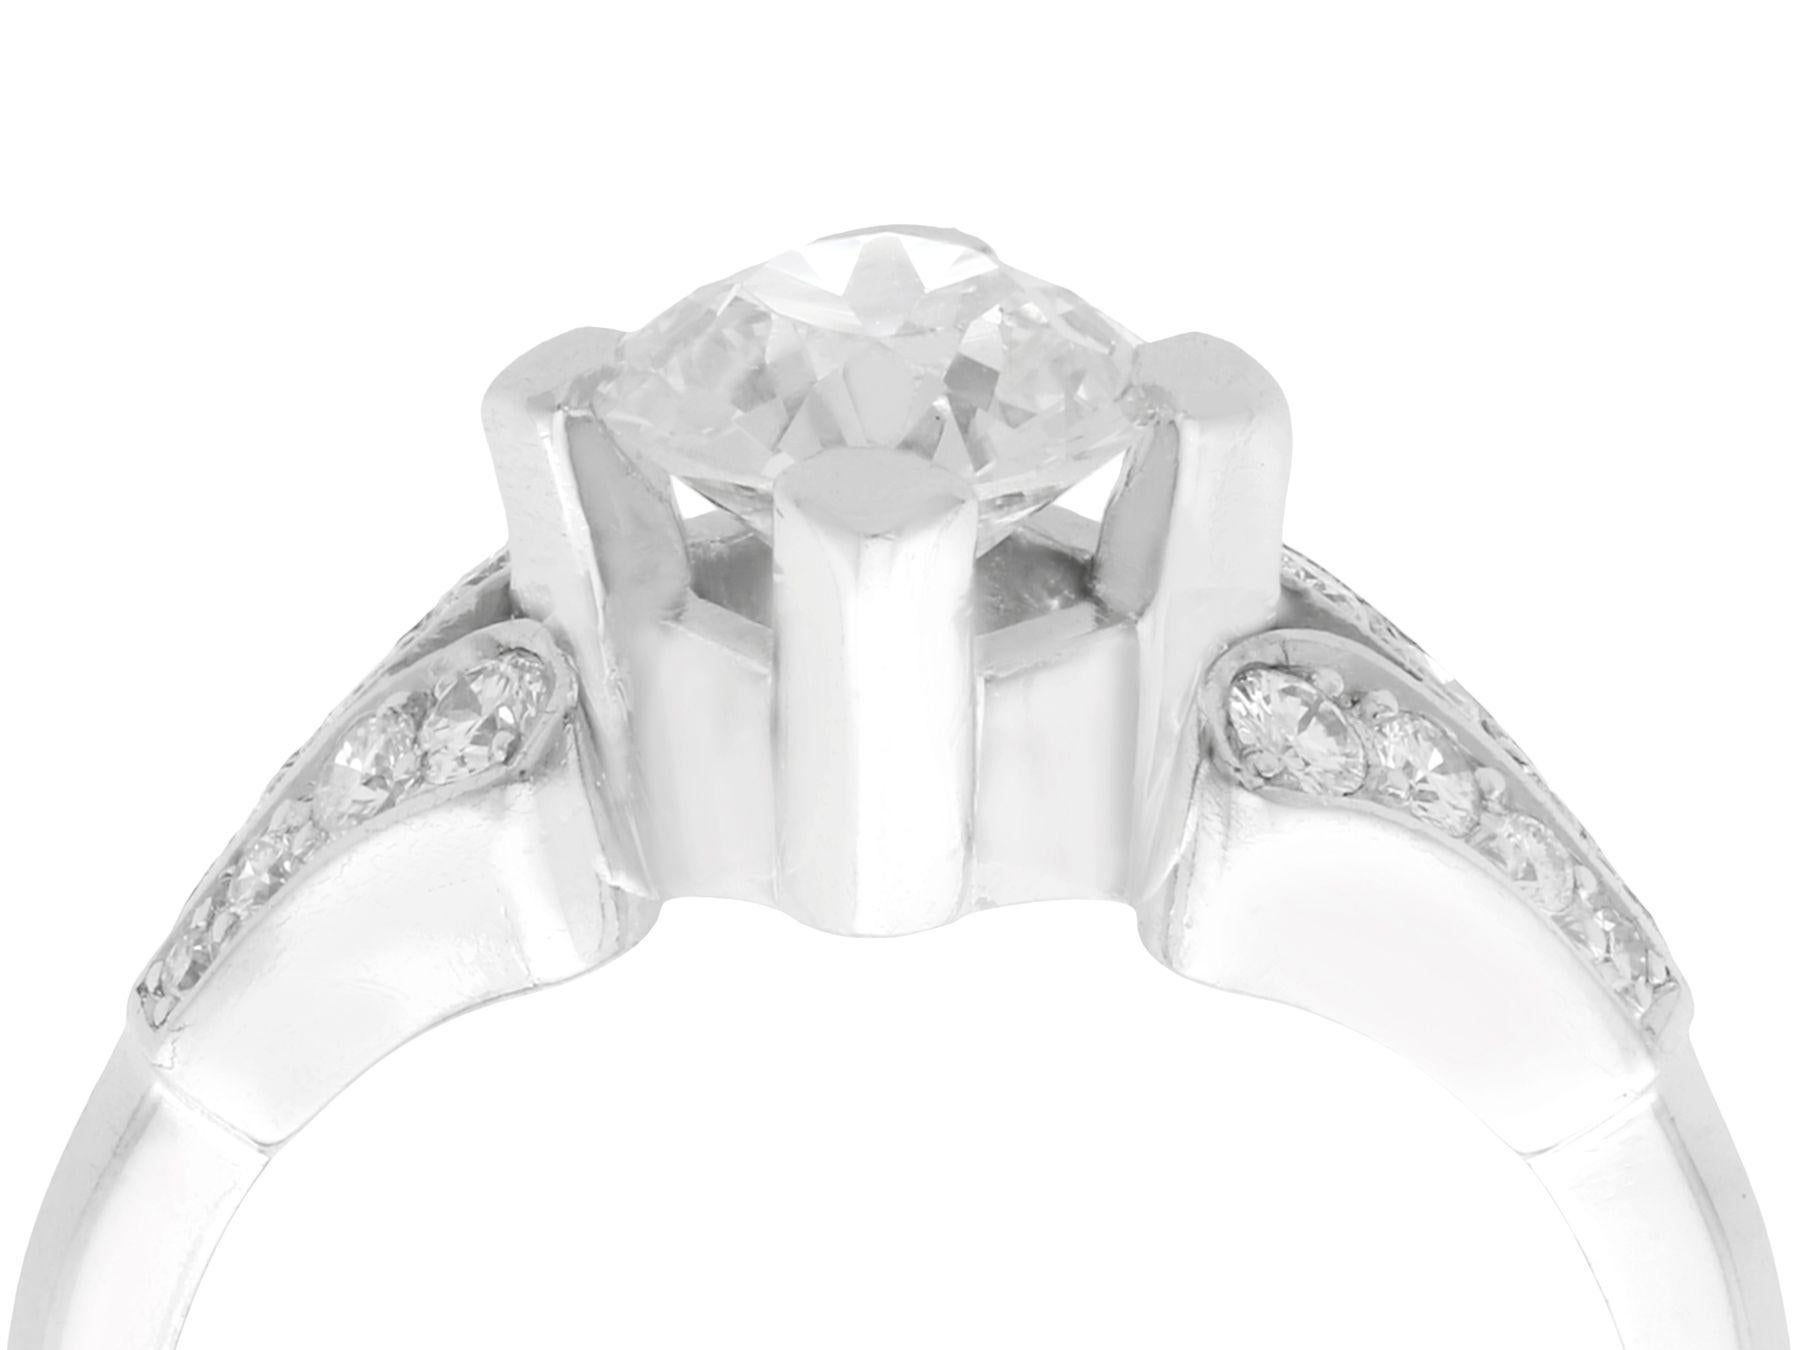 A stunning vintage 1940s 1.29 carat diamond and platinum solitaire style engagement ring; part of our diverse diamond jewelry and estate jewelry collections.

This stunning, fine and impressive diamond solitaire ring with accents has been crafted in